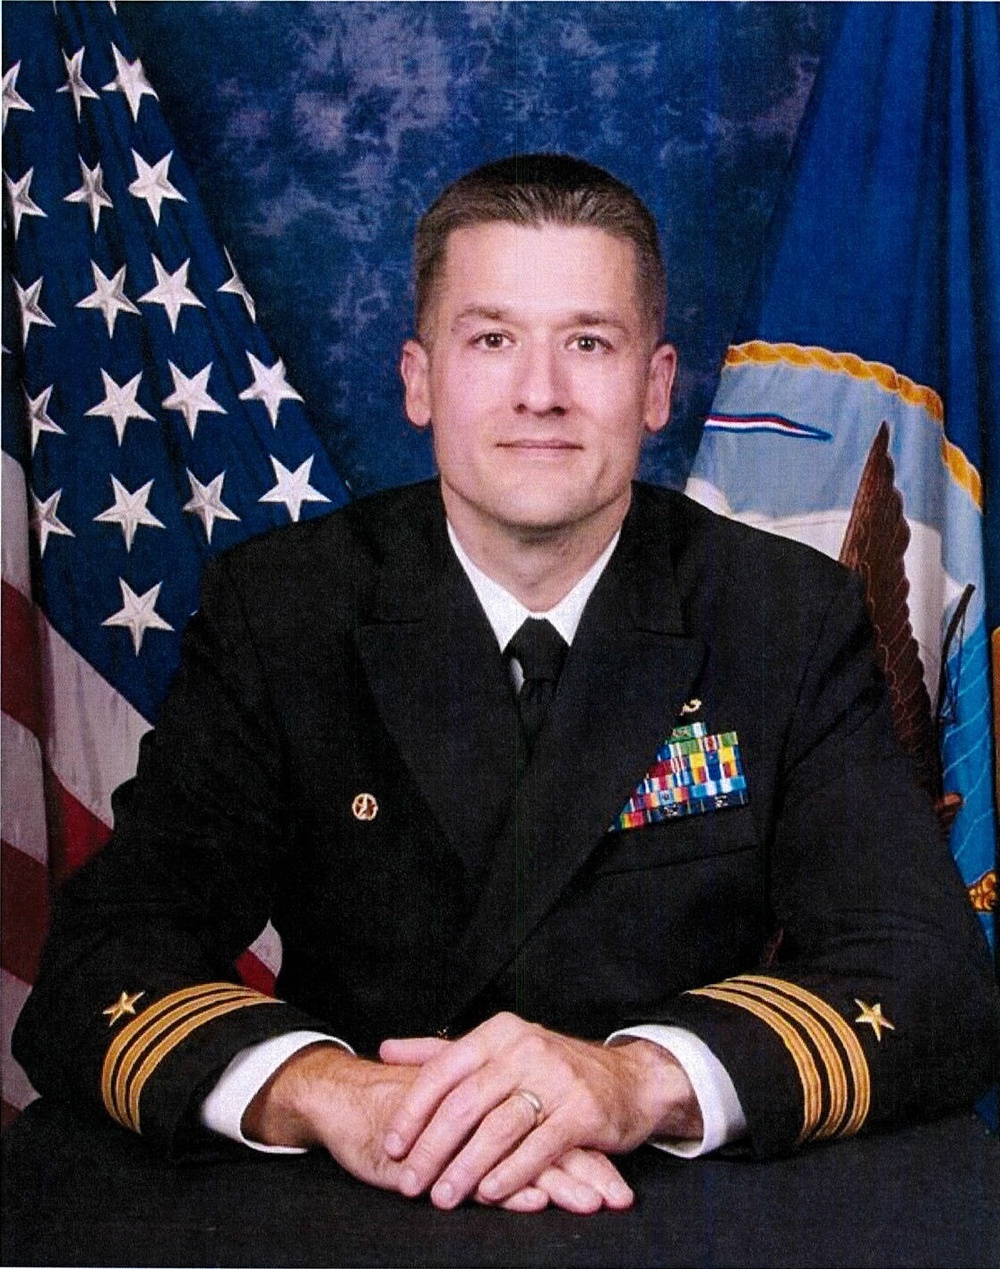 USS New Hampshire welcomes back former executive officer as new commander